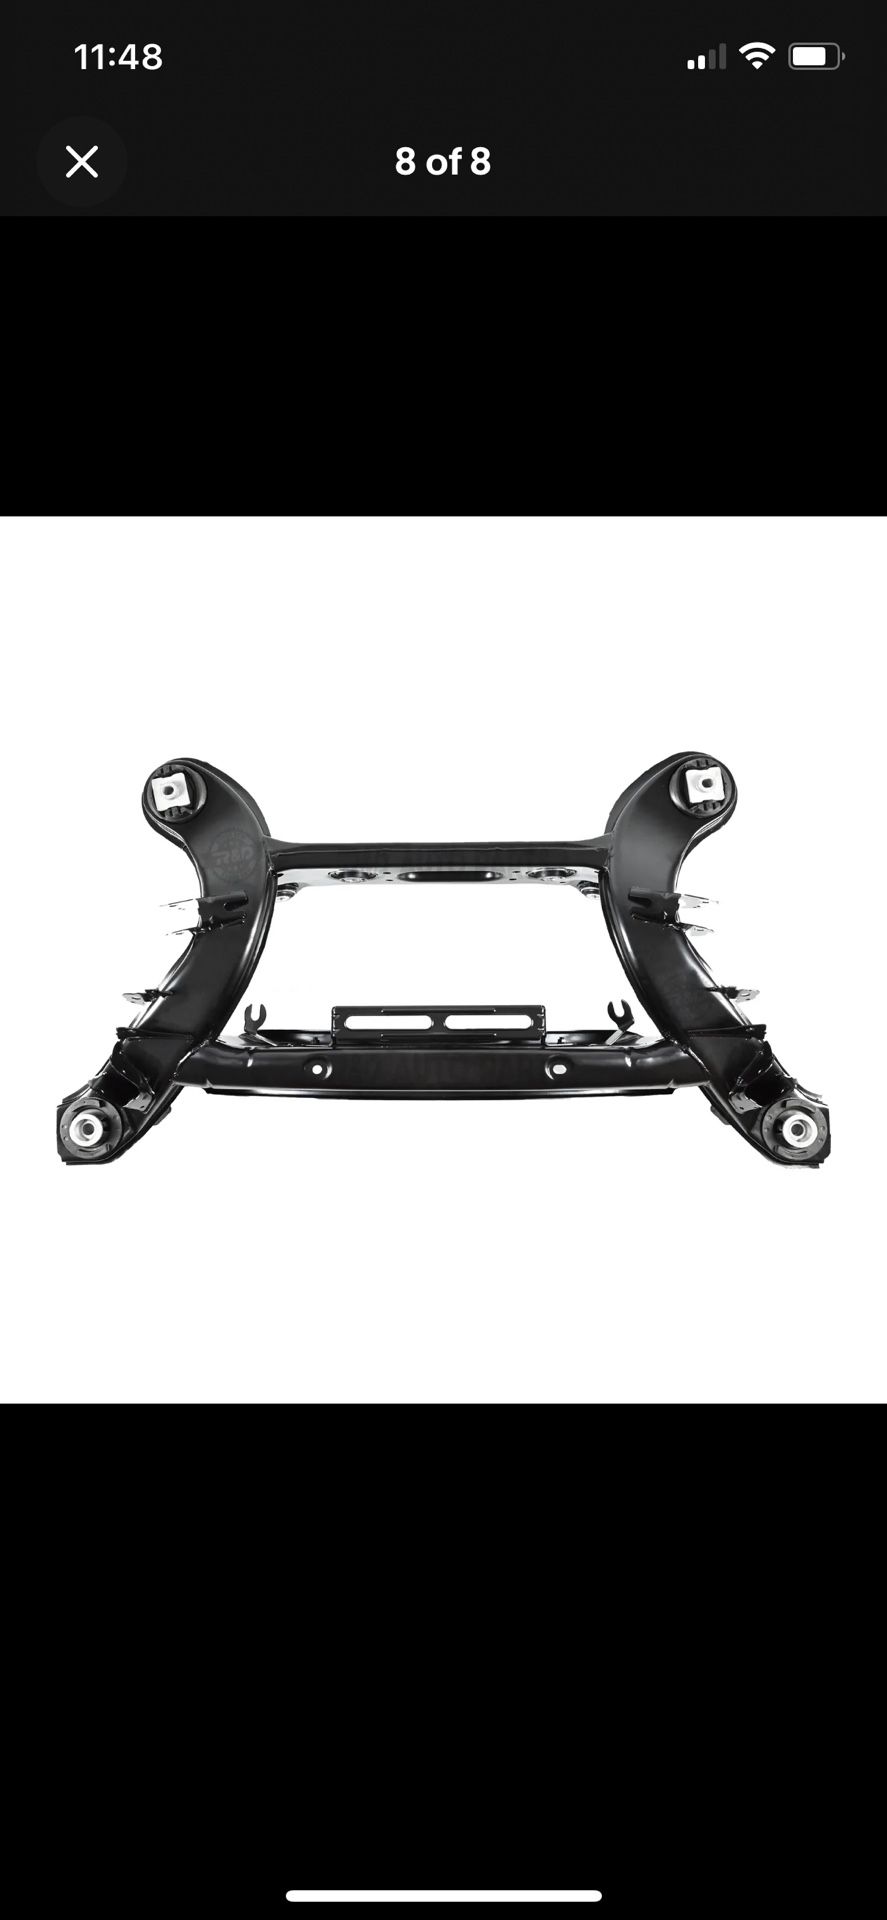 08-14 Rear Subframe  for Mercedes Benz C300 W204 W212 